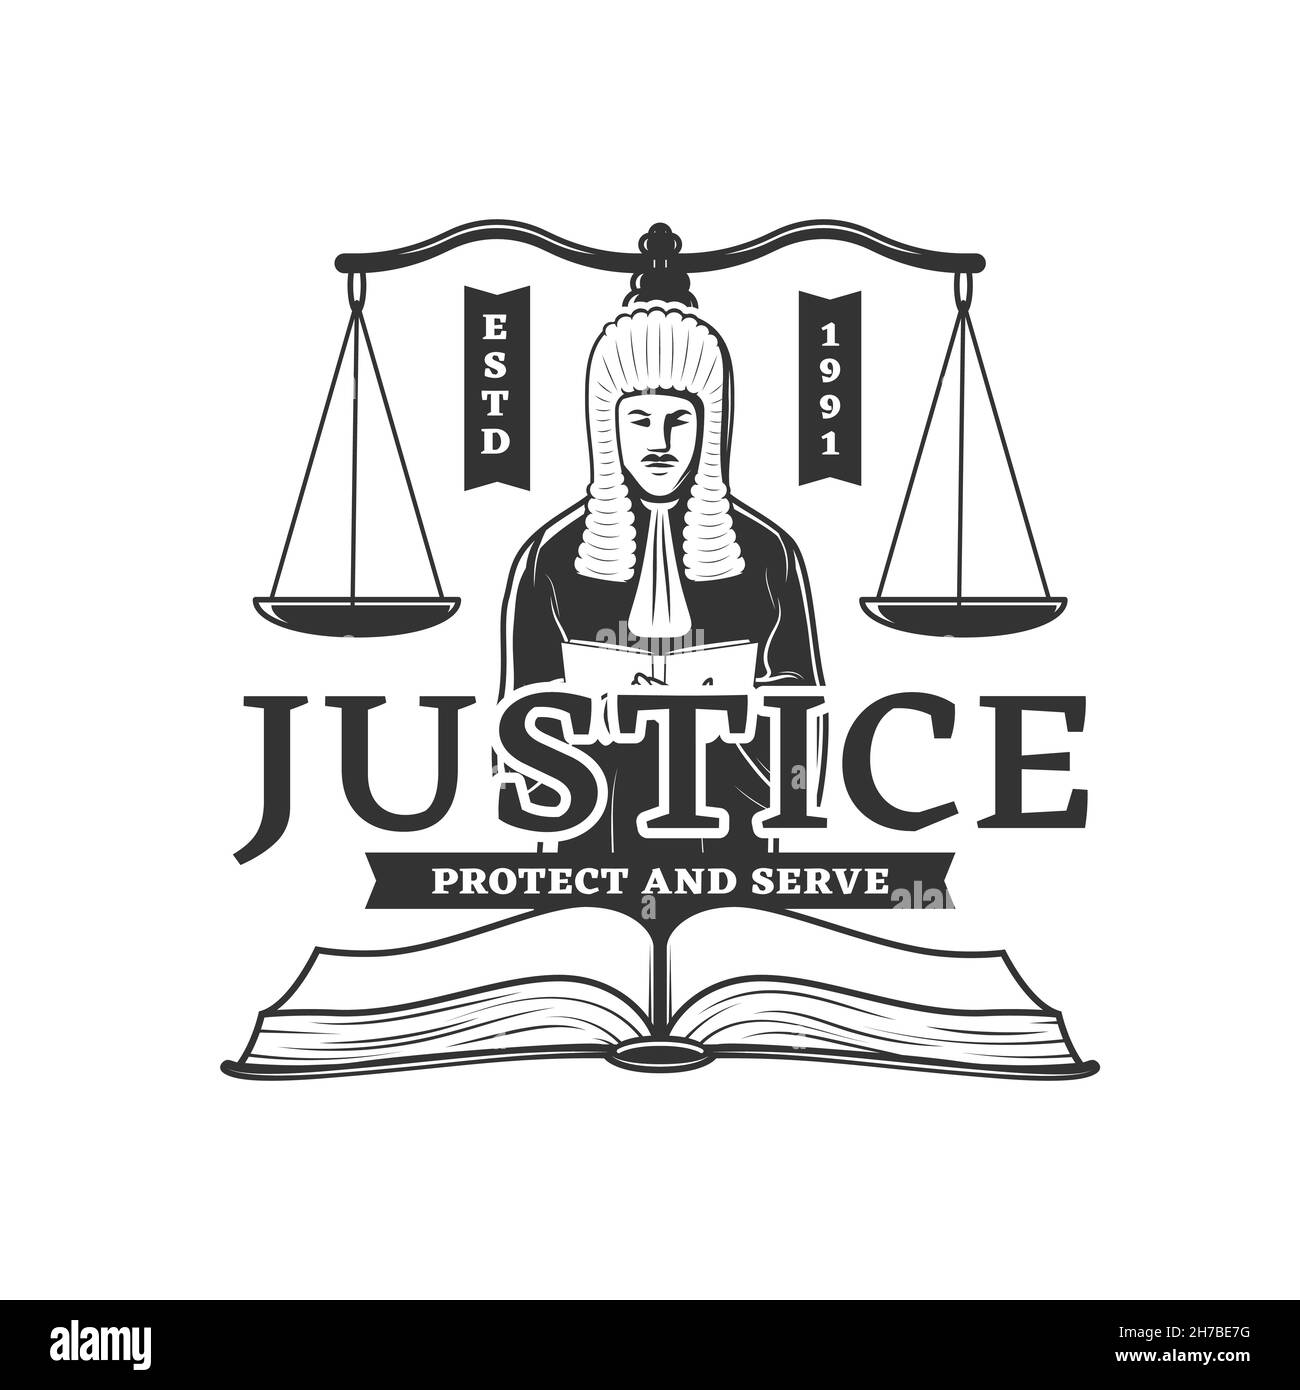 Lawyer in gown Stock Vector Images - Alamy